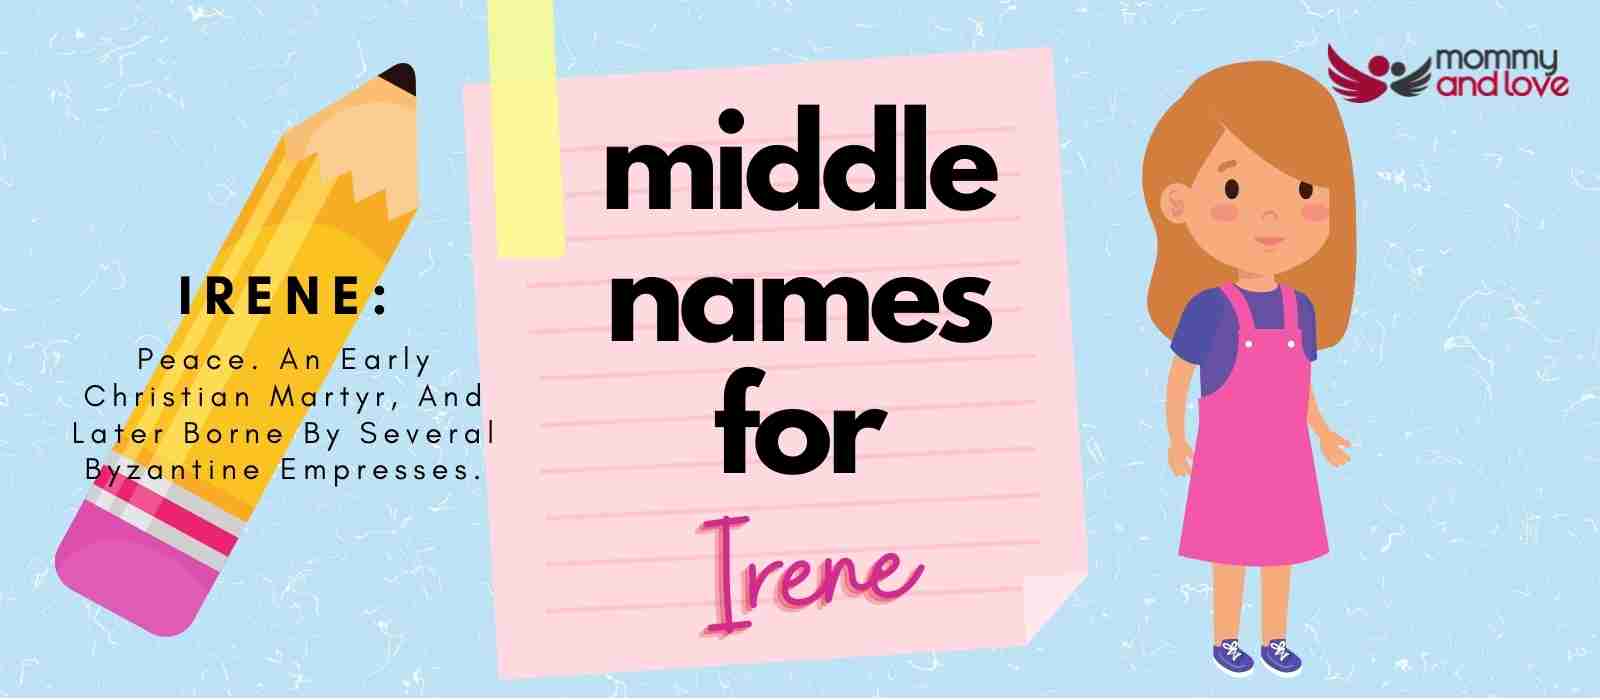 Middle Names for Irene